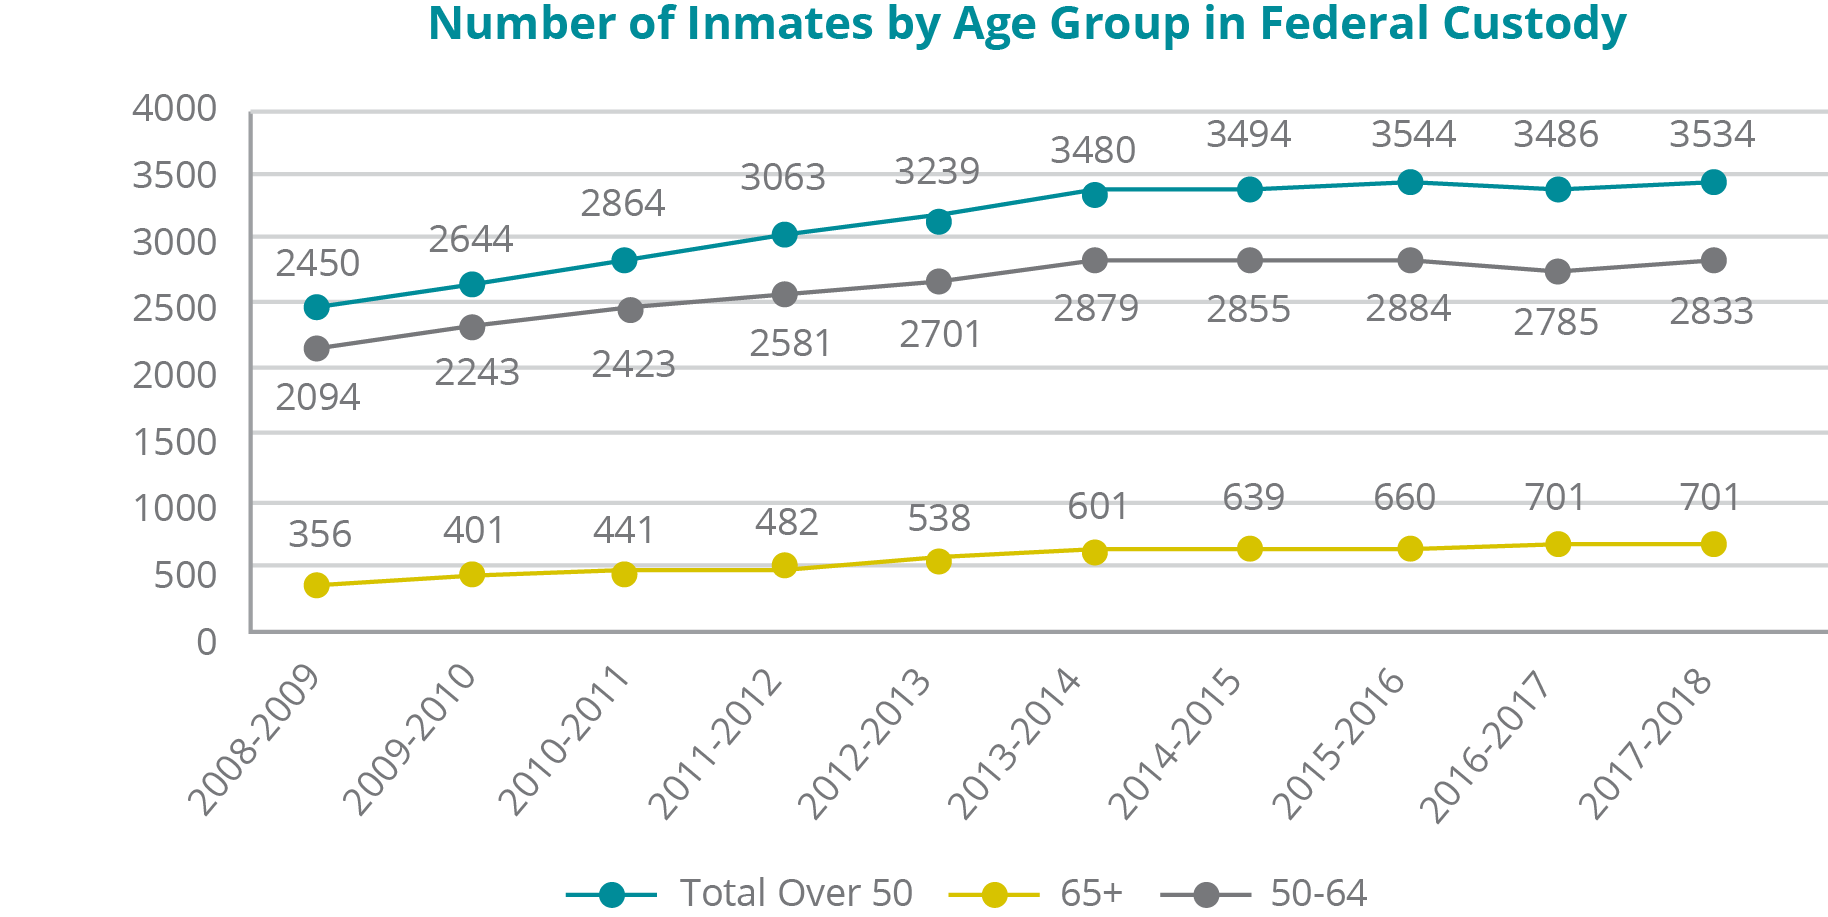 A graph depicting the number of inmates by age group in federal custody for fiscal years 2008-09 to 2017-18: -	Total inmates over 50 years of age: In 2008-09, 2450; 2009-10, 2644; 2010-11, 2864; 2011-12, 3063; 2012-13, 3239; 2013-14, 3480; 2014-15, 3494; 2015-16, 3544; 2016-17, 3486; 2017-18, 3534. - Total inmates between 50 and 64: In 2008-09, 2094; 2009-10, 2243; 2010-11, 2423; 2011-12, 2581; 2012-13, 2701; 2013-14, 2879; 2014-15, 2855; 2015-16, 2884; 2016-17, 2785; 2017-18, 2833. -	Total inmates aged 65+: In 2008-09, 356; 2009-10, 401; 2010-11, 441; 2011-12, 482; 2012-13, 538; 2013-14, 601; 2014-15, 639; 2015-16, 660; 2016-17, 701; 2017-18, 701.